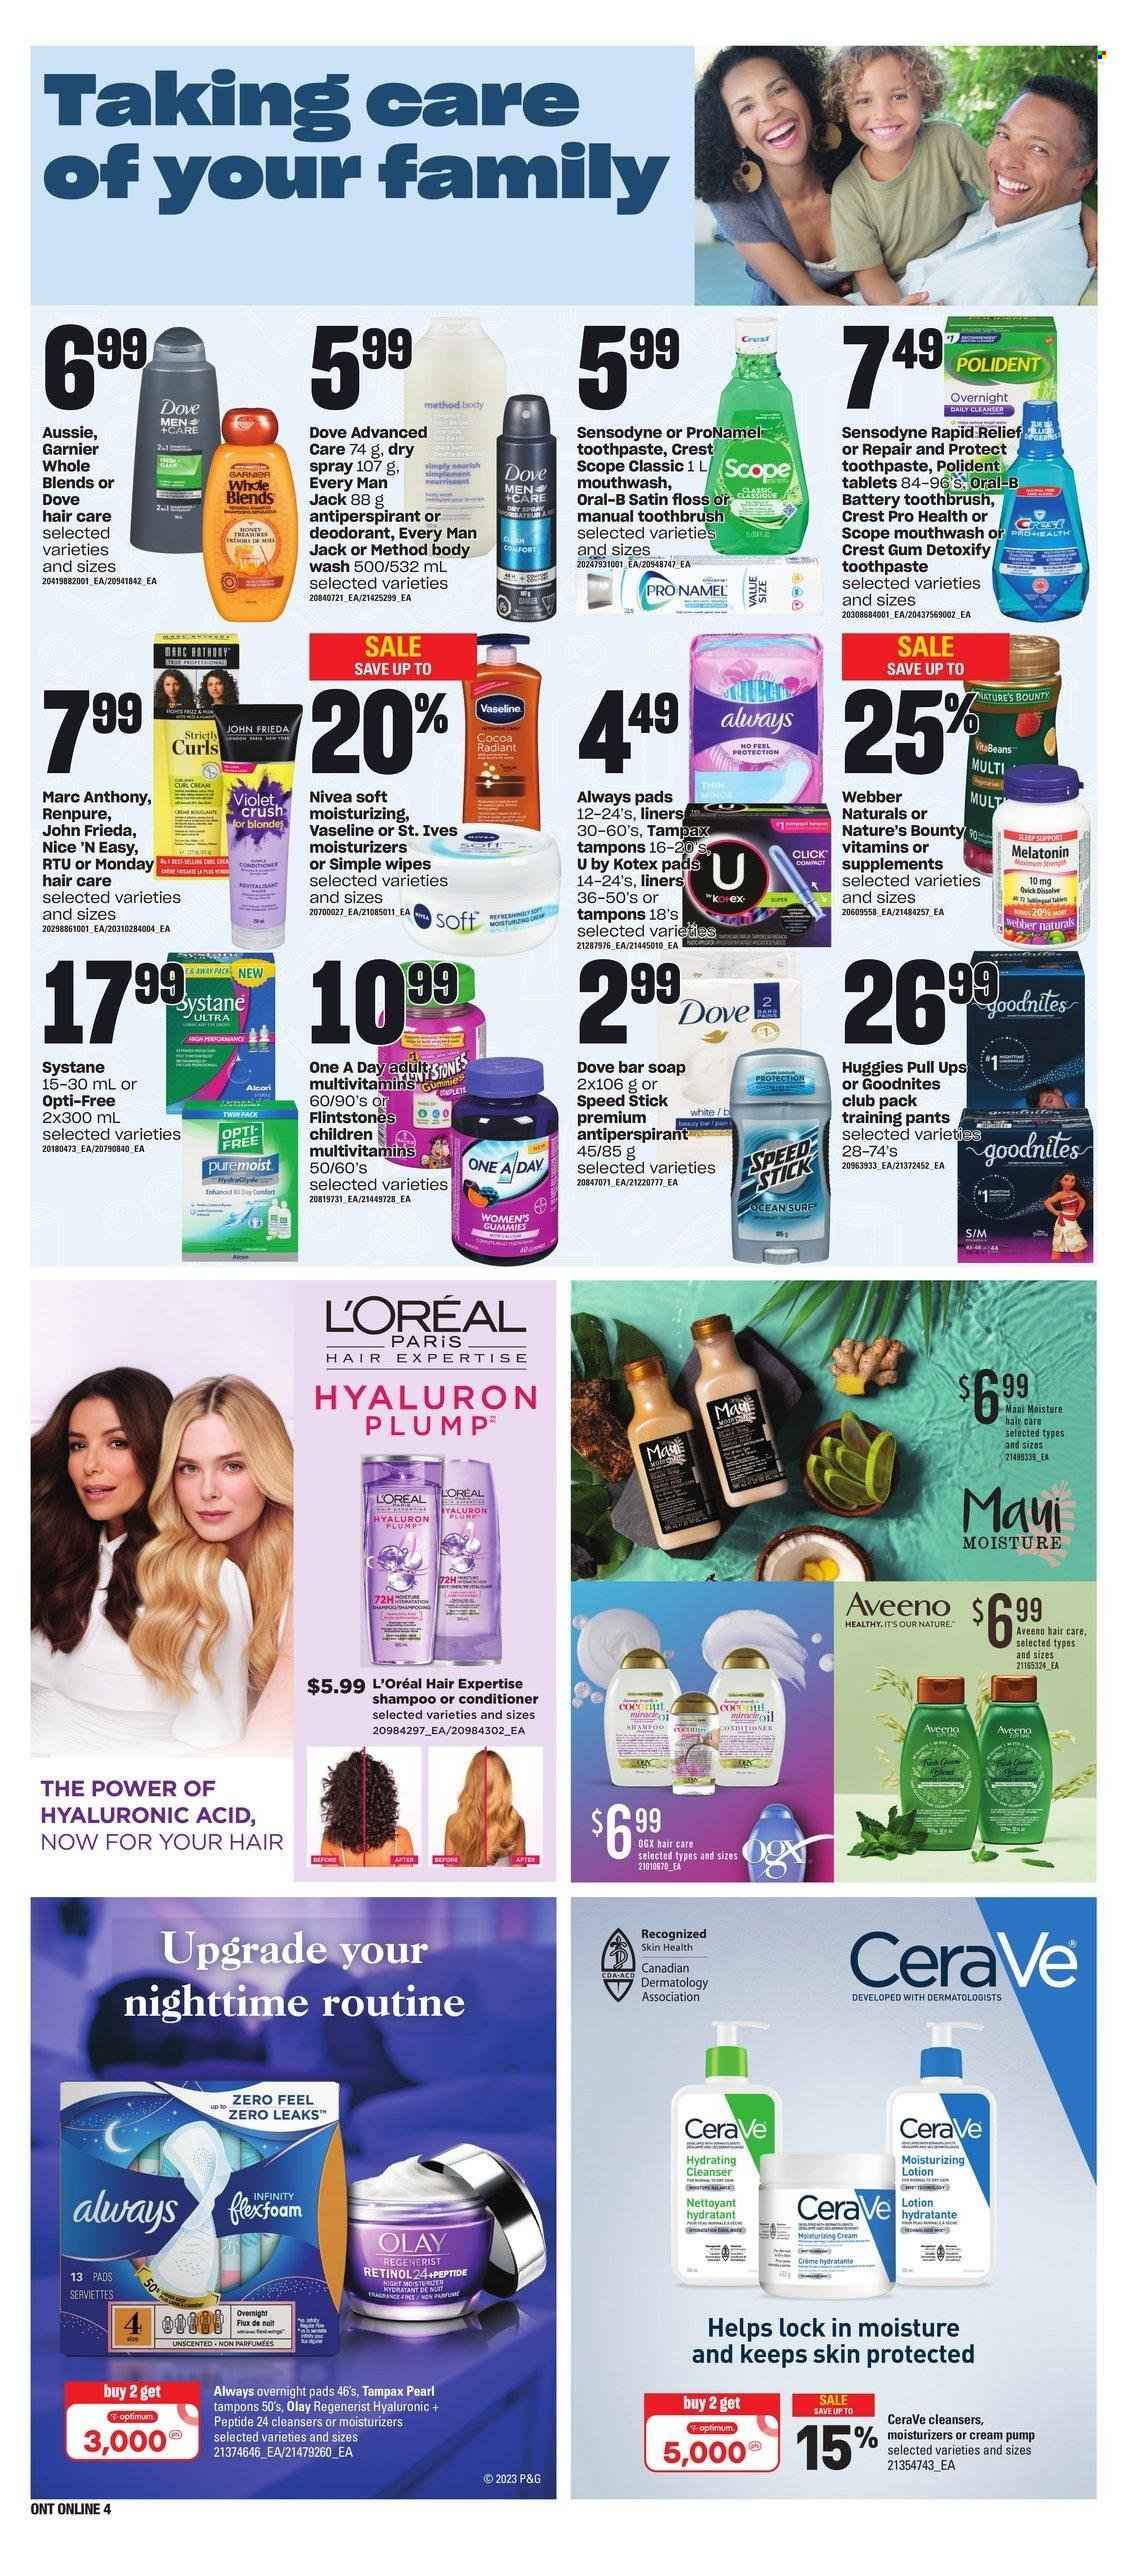 thumbnail - Loblaws Flyer - March 16, 2023 - March 22, 2023 - Sales products - Dove, wipes, pants, baby pants, Aveeno, Nivea, cleaner, body wash, Vaseline, soap bar, soap, toothbrush, toothpaste, mouthwash, Polident, Crest, Always pads, sanitary pads, Kotex, Kotex pads, tampons, CeraVe, cleanser, L’Oréal, moisturizer, Olay, Infinity, Aussie, conditioner, John Frieda, Maui Moisture, body lotion, anti-perspirant, fragrance, Speed Stick, Optimum, Melatonin, multivitamin, Nature's Bounty, Garnier, shampoo, Systane, Tampax, Huggies, Oral-B, Sensodyne, deodorant. Page 8.